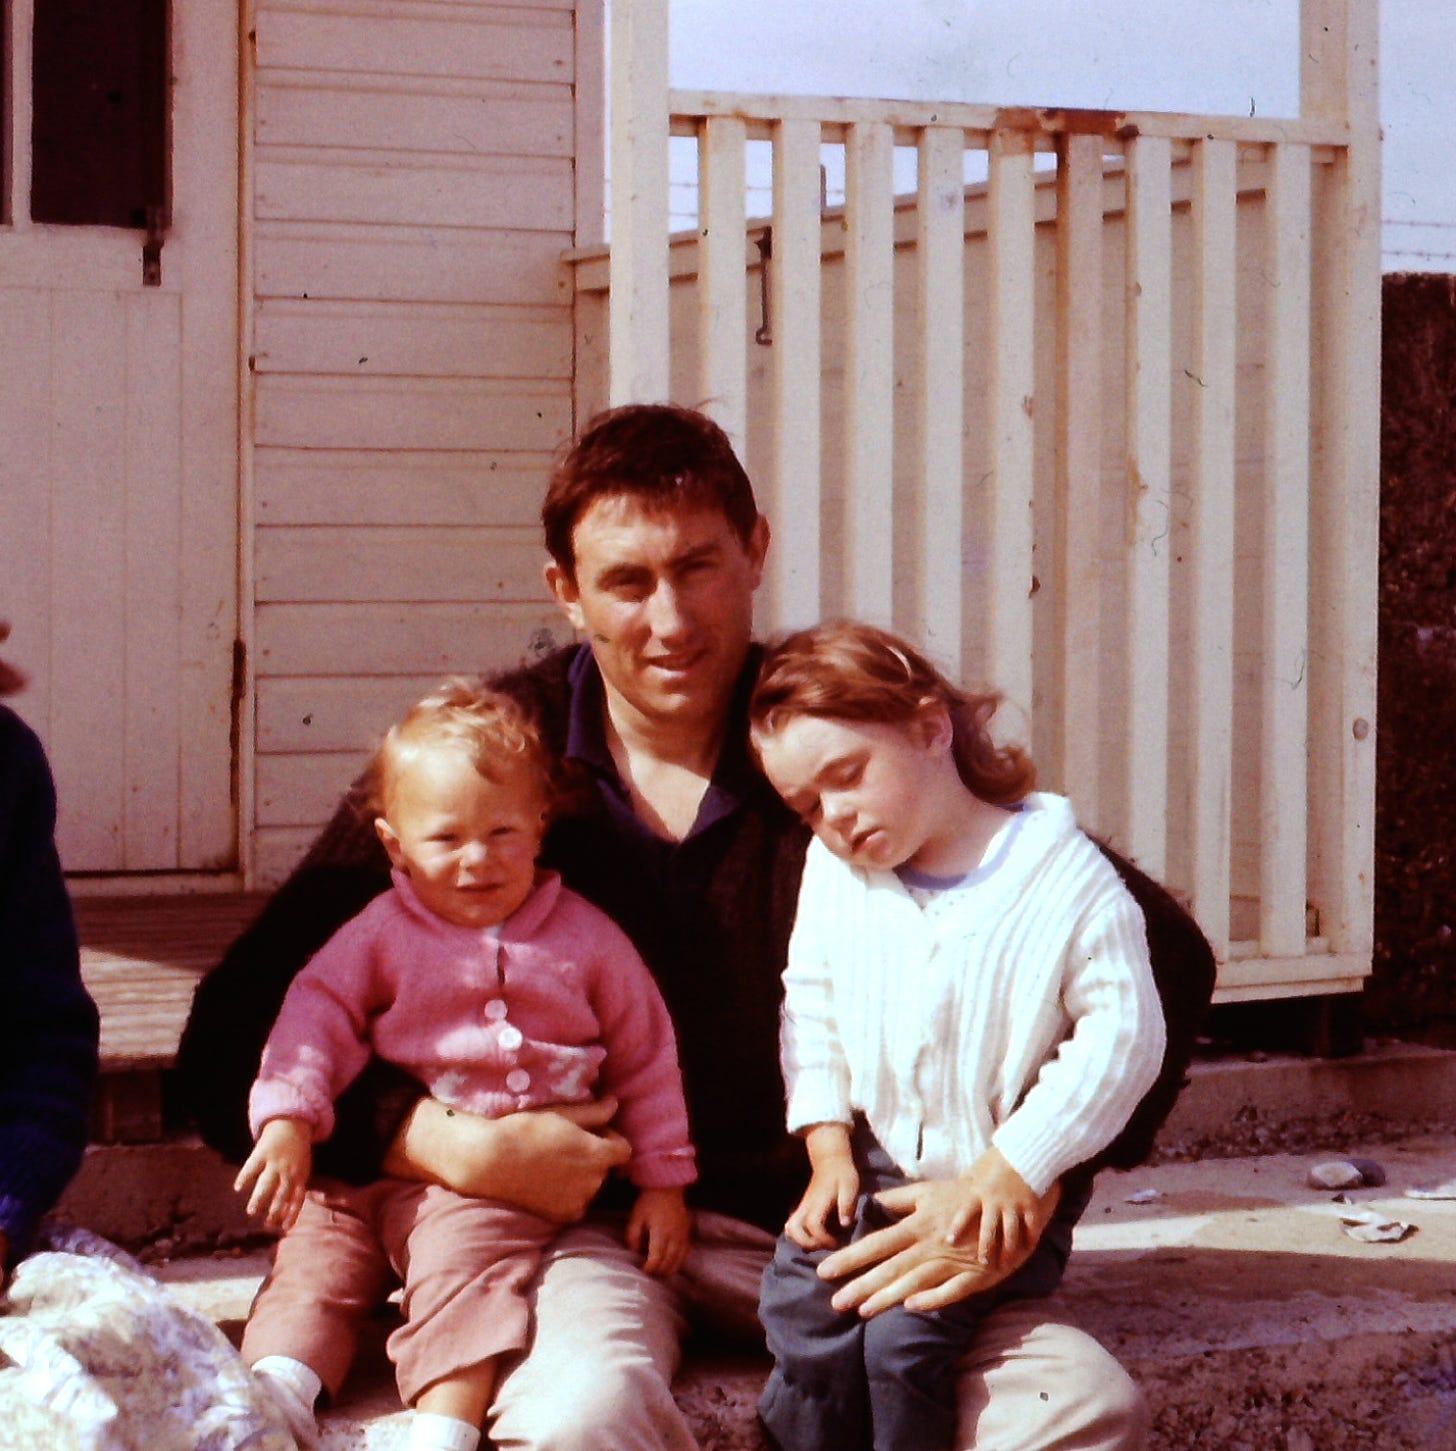 The photo shows Penny aged around four years old sitting on her dad Michael's lap while on the other side is her baby brother. Penny looks tired and keeps her hand firmly over her dad's. She wears a cute white cardigan and has blonde red hair. Her brother wears a pale pink cardigan with white buttons and little brown trousers. Michael is wearing a black jumper. He has black hair and a handsome face. They are sitting on the steps of a holiday chalet and the sun is out.